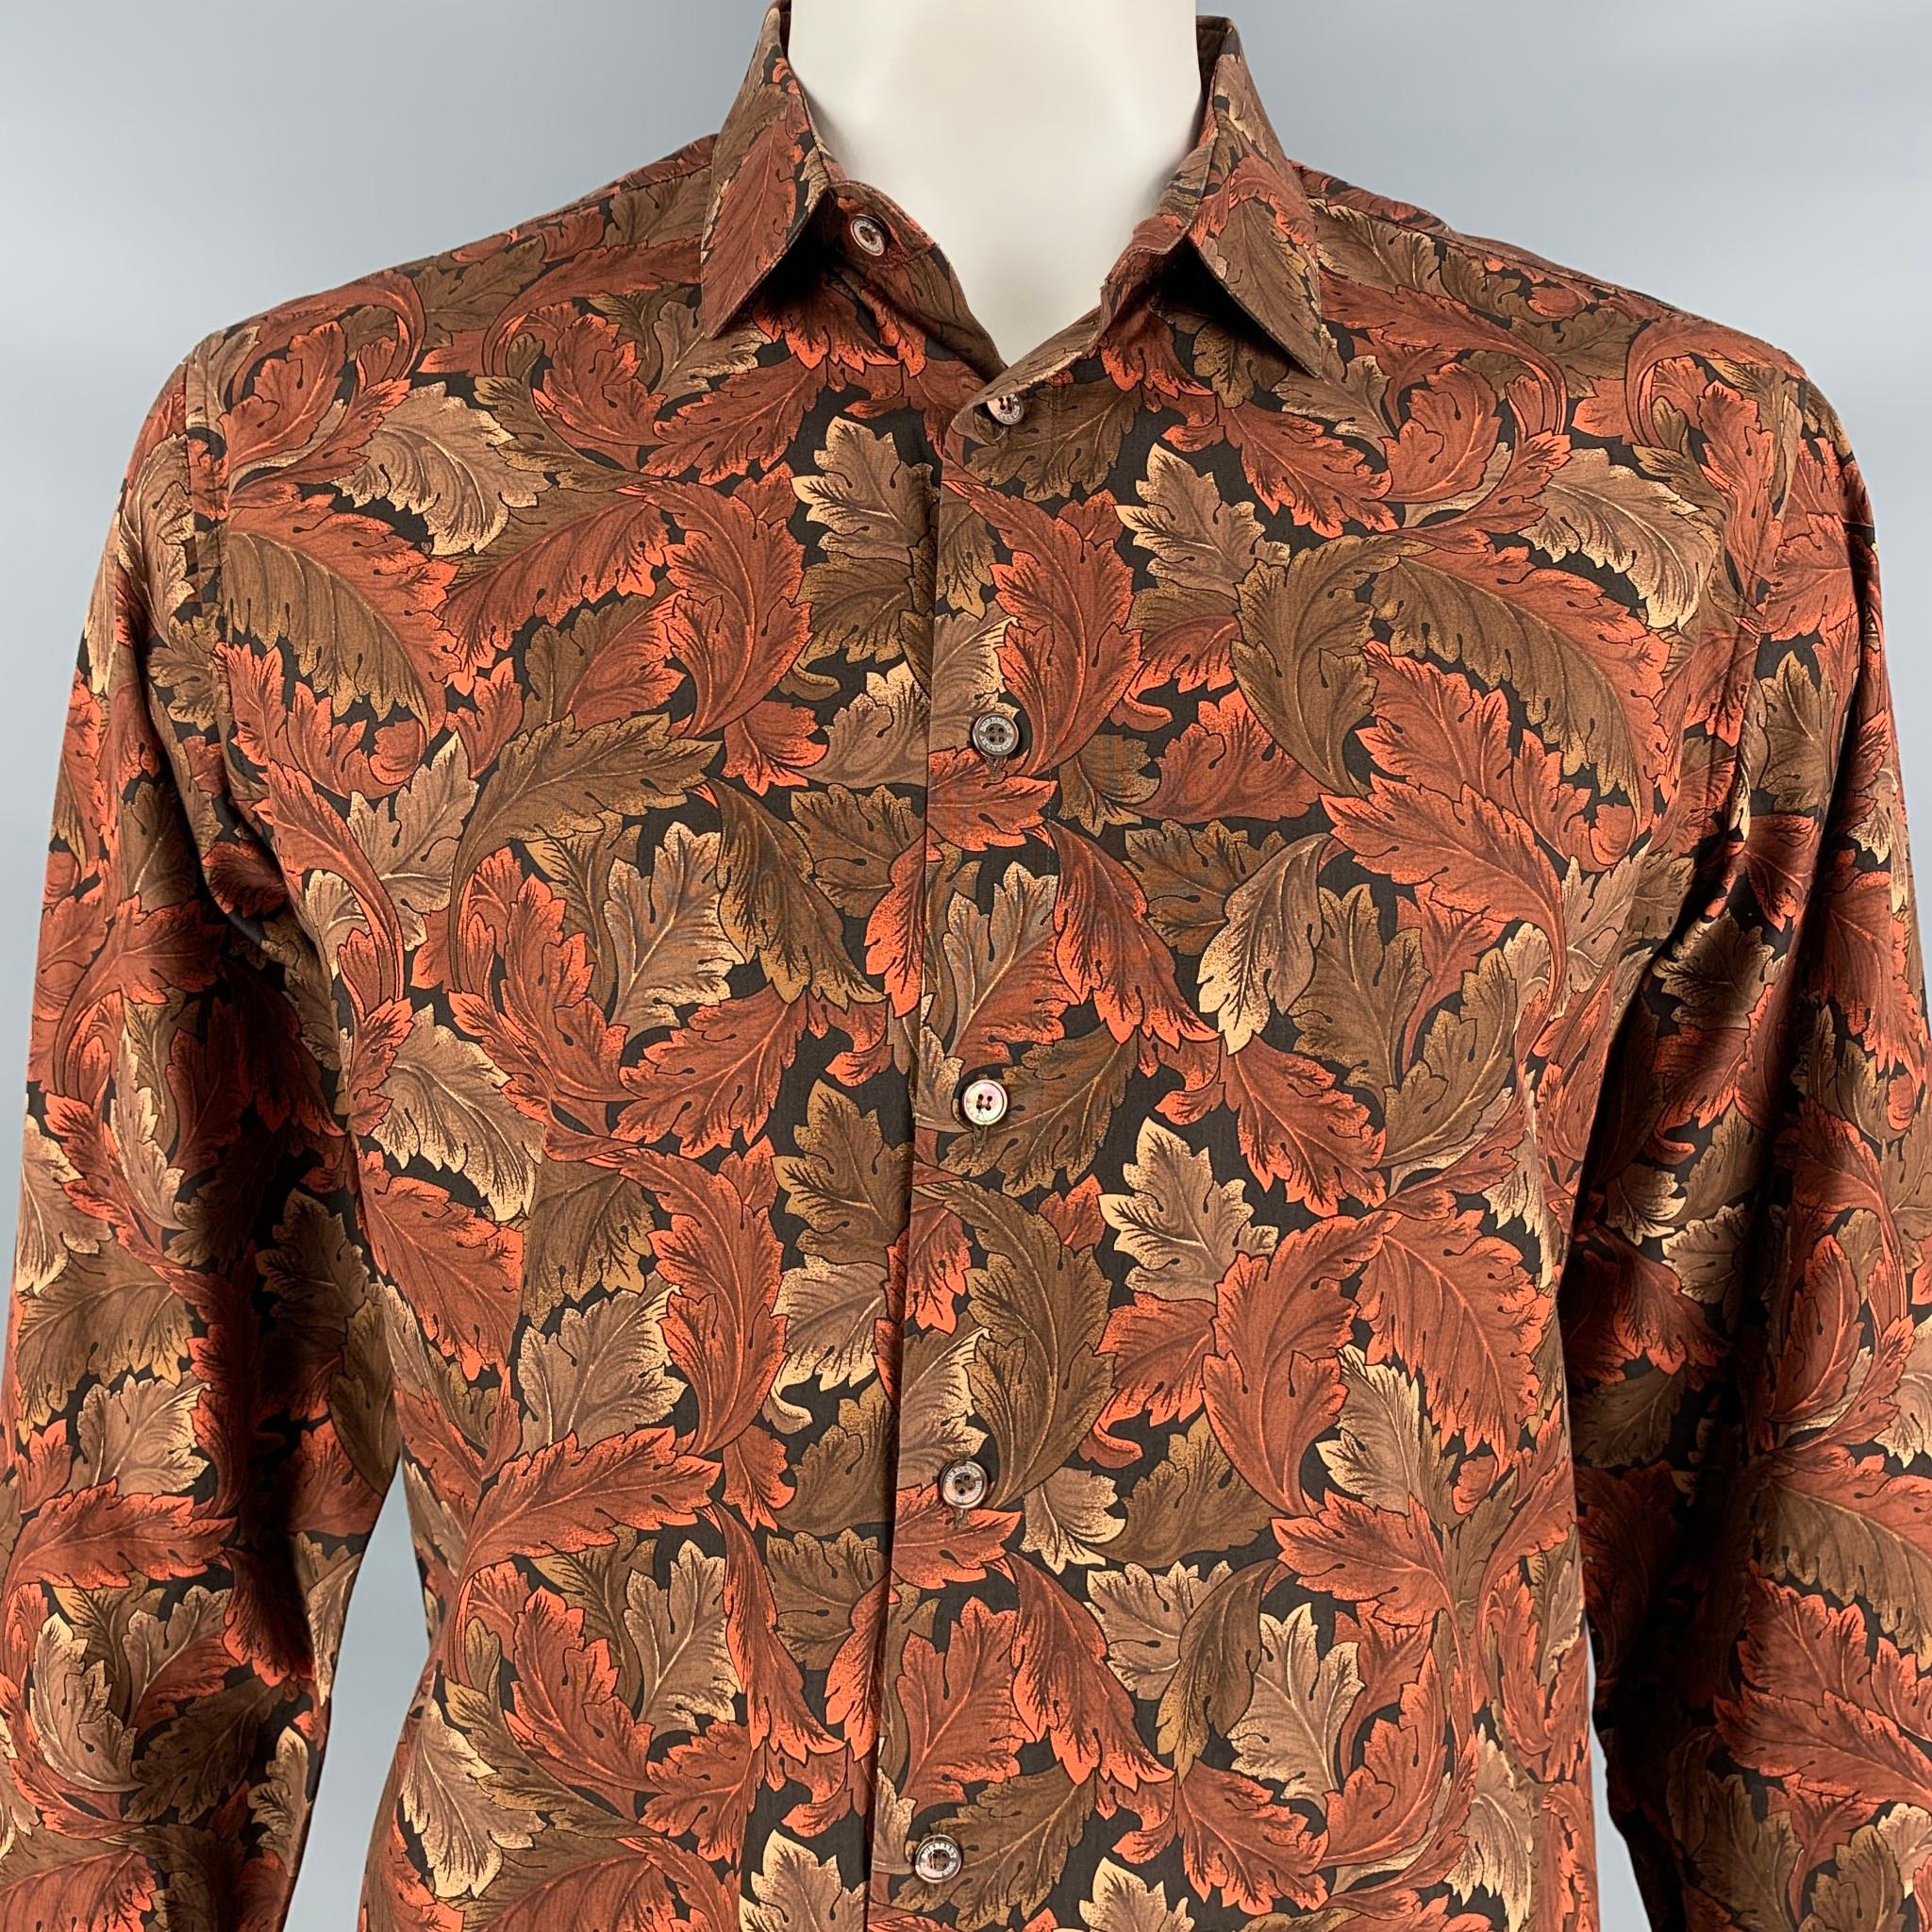 BURBERRY PRORSUM Fall 2008 long sleeve shirt comes in a brown & black leaf print cotton featuring a spread collar and a button up closure. Made in Italy.

Very Good Pre-Owned Condition.
Marked: 42/16.5

Measurements:

Shoulder: 19.5 in.
Chest: 46